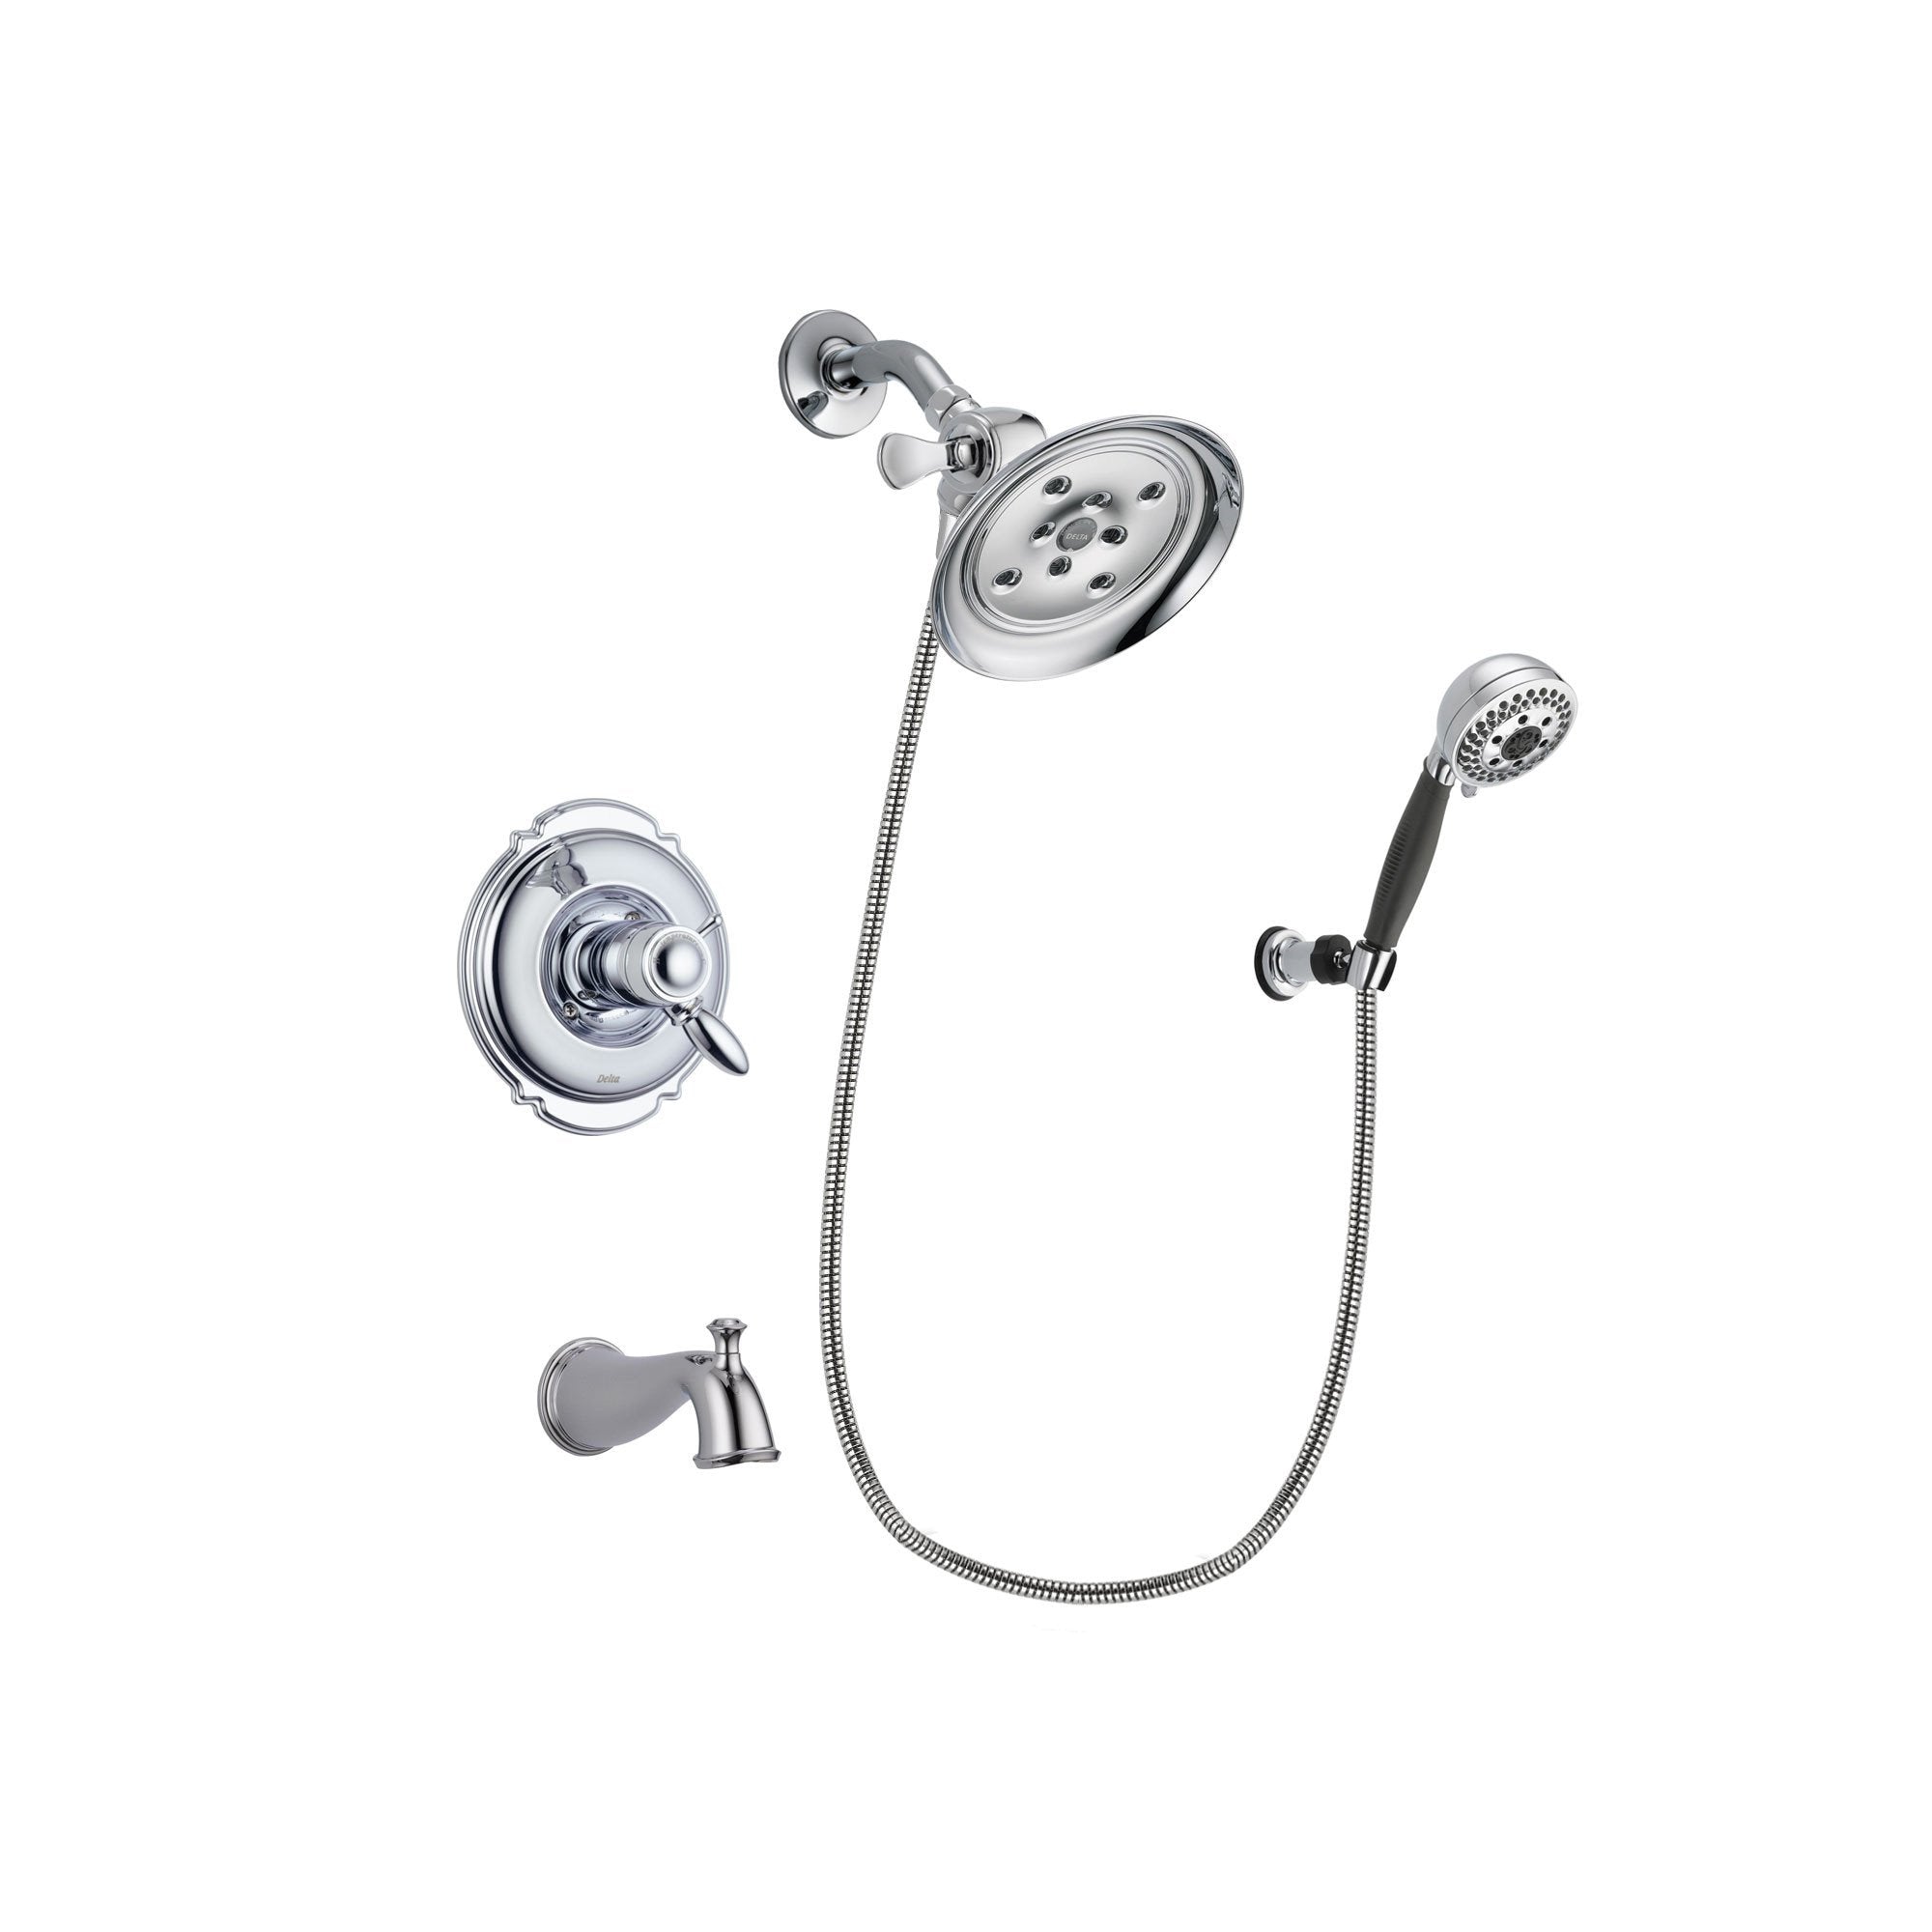 Delta Victorian Chrome Tub and Shower Faucet System with Hand Shower DSP1175V